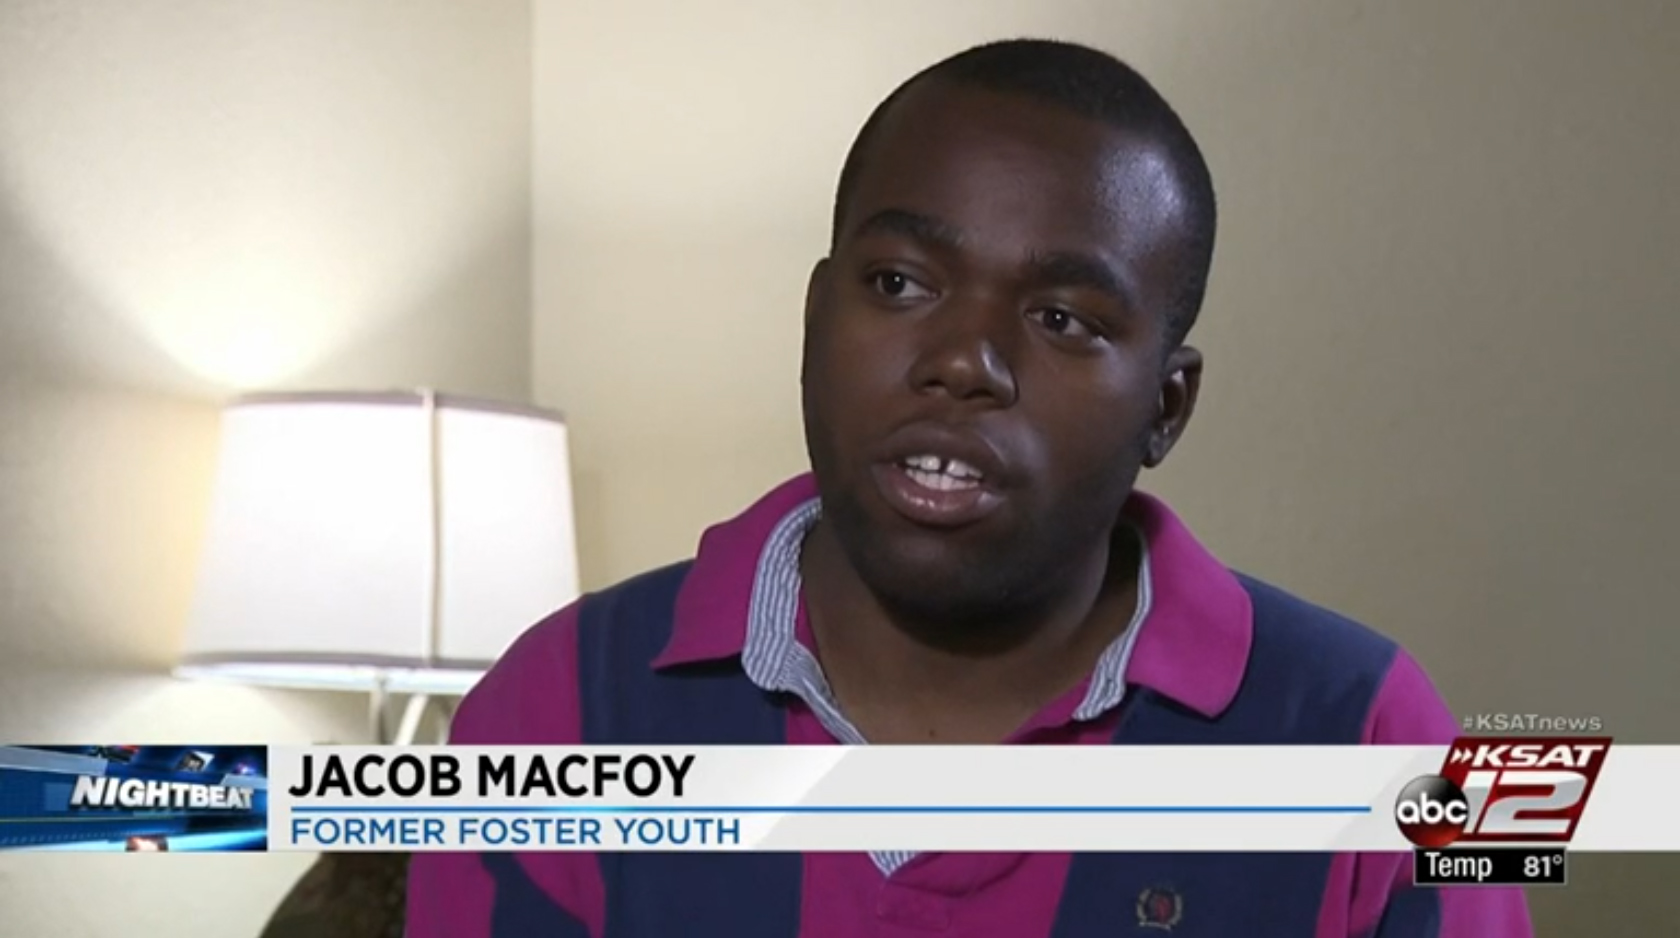 Jacob Macfoy former foster care youth